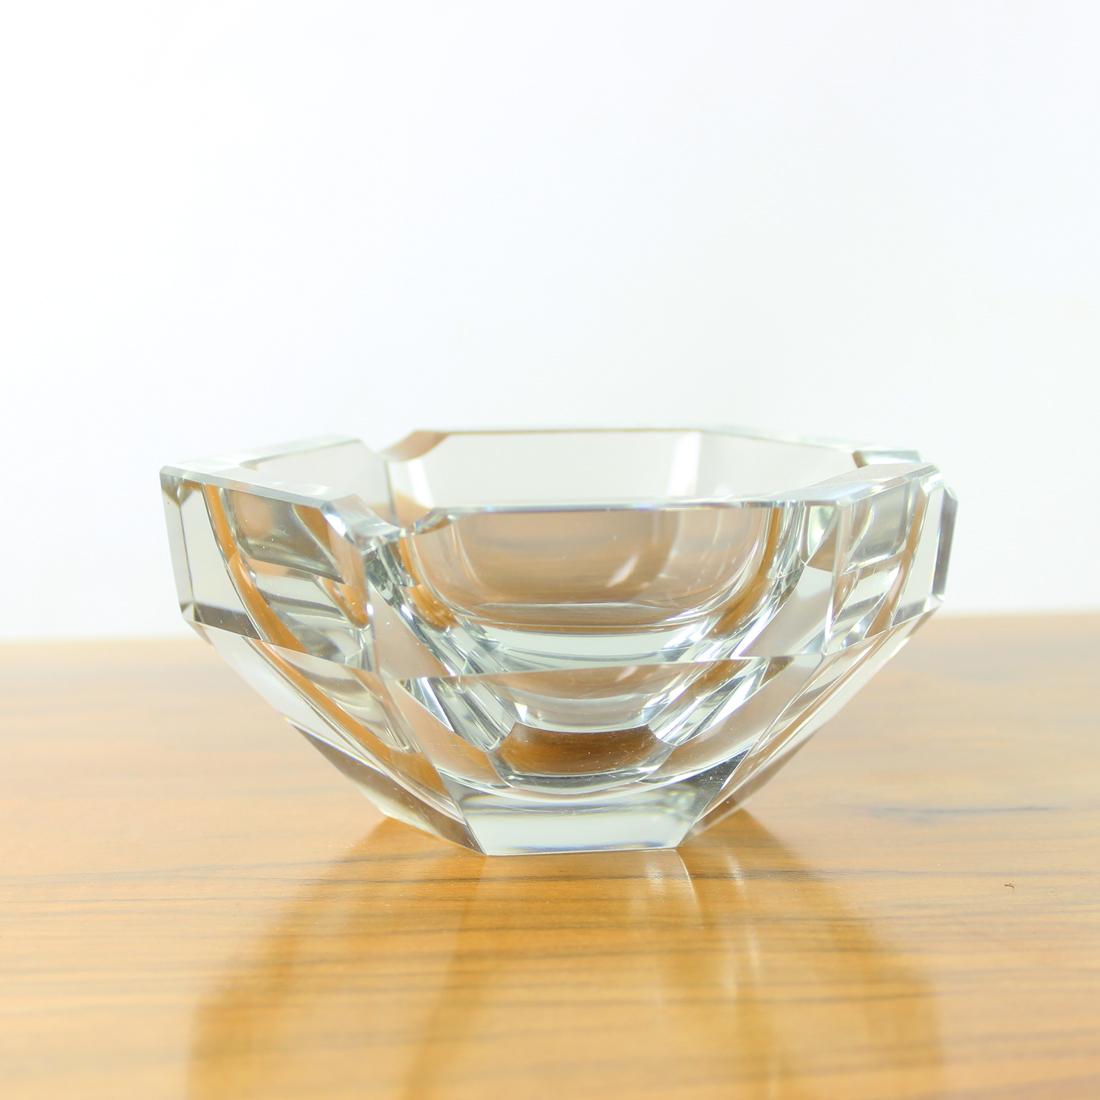 Beautiful vintage ashtray produced in Czechoslovakia in 1950s. Made of pure transparent glass into a diamond shape design. Beautiful item that can be used as a key bowl. Looks stunning just by itself. No damage or chips on the glass. excellent